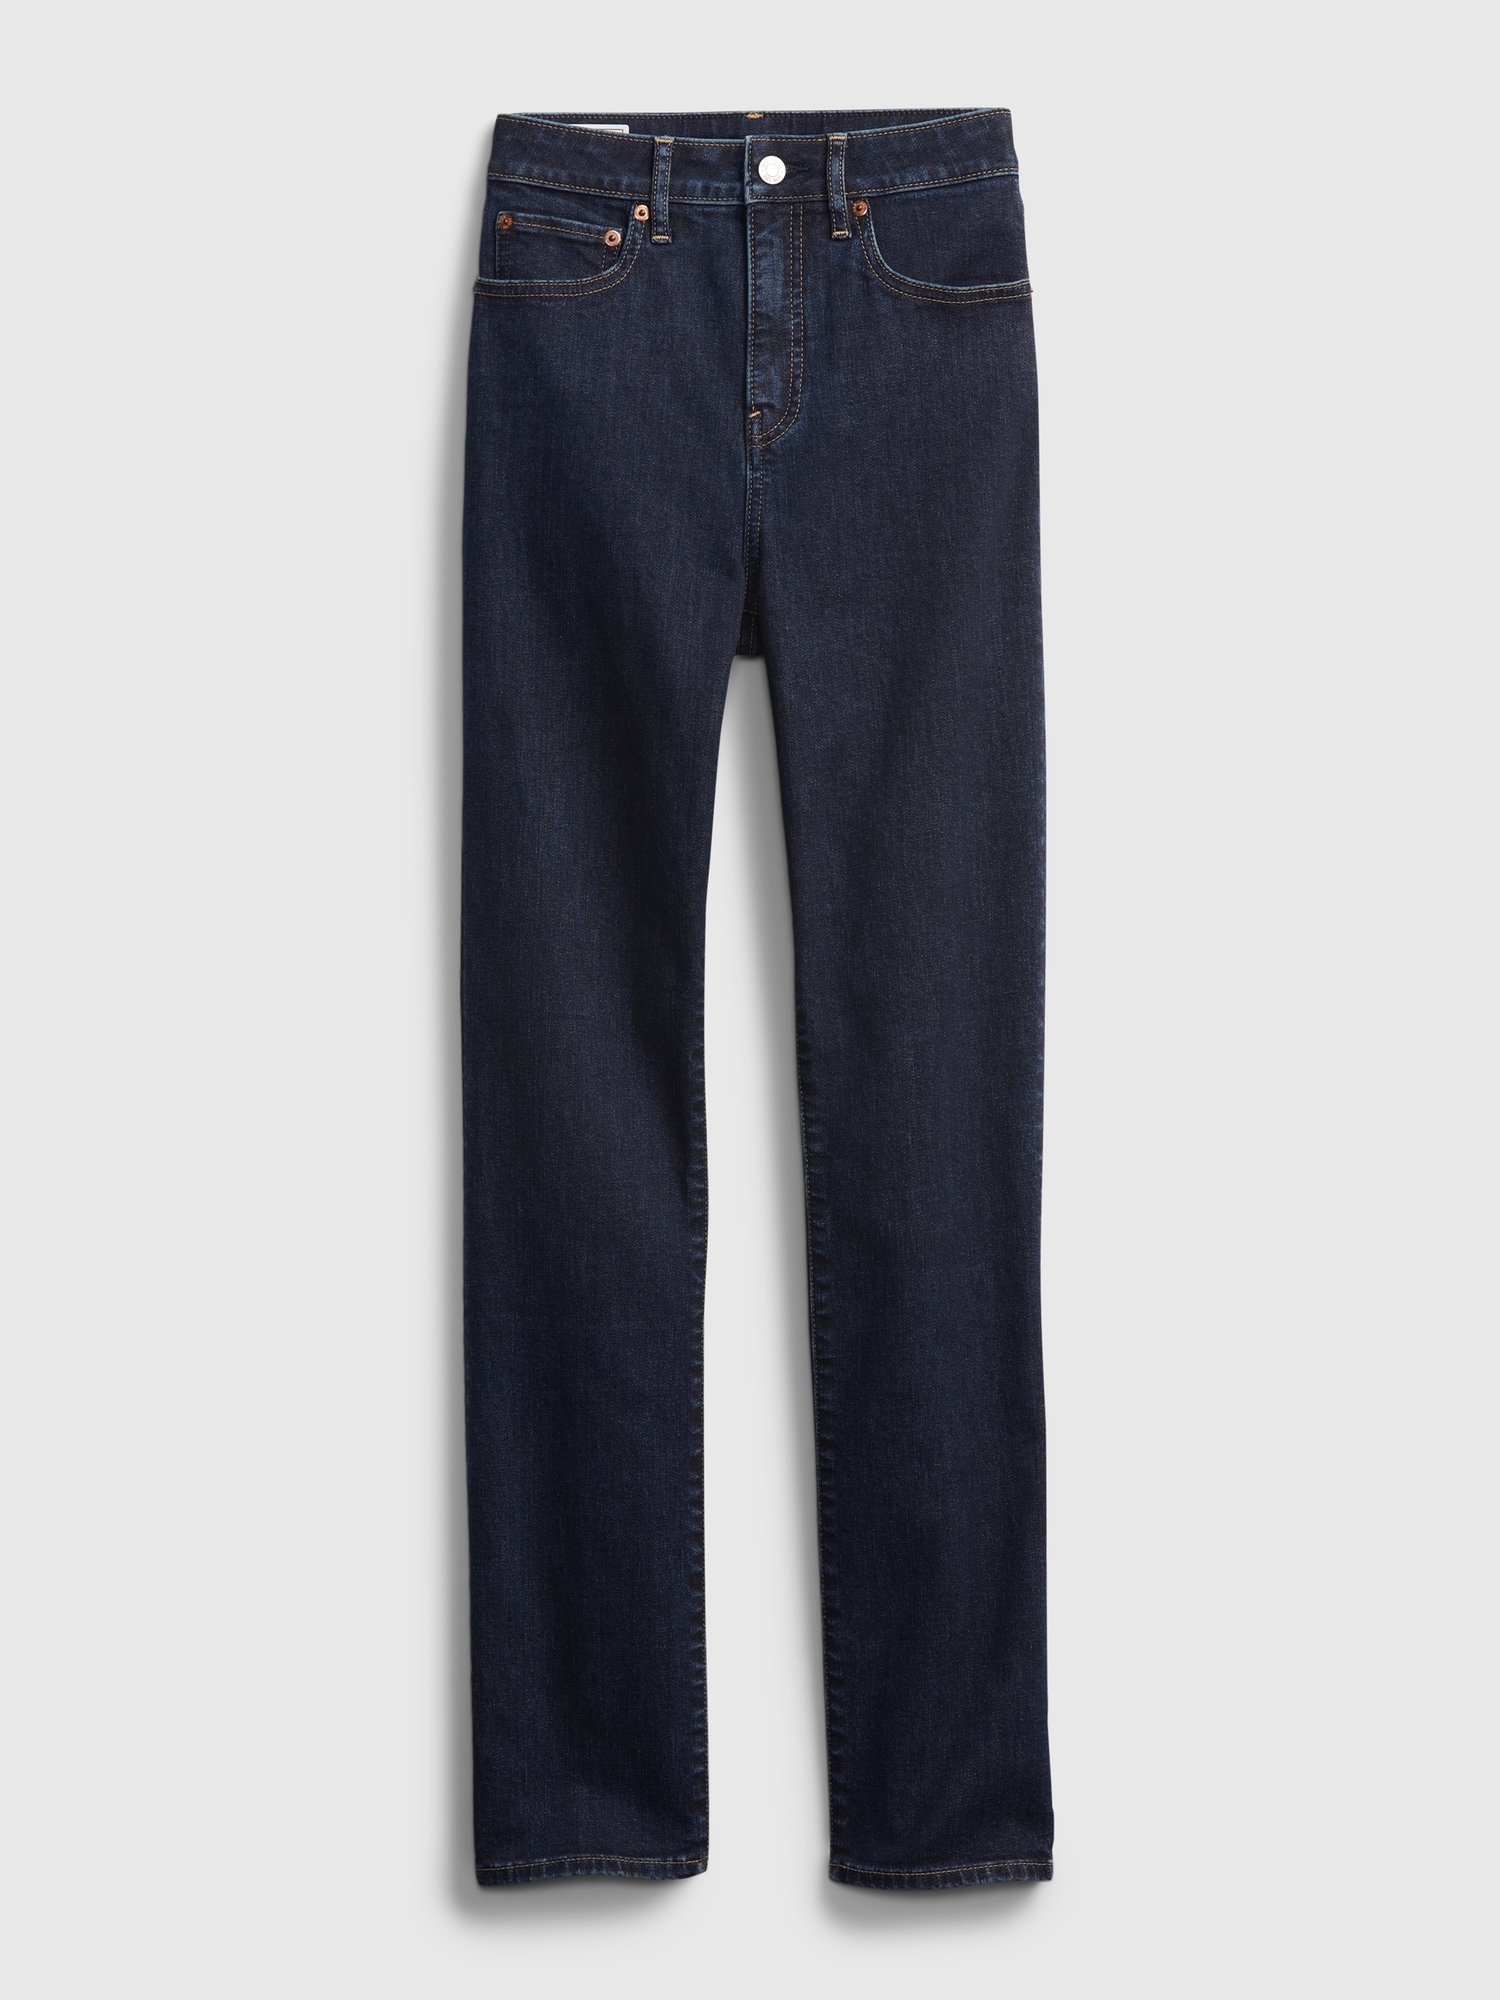 High Rise Classic Straight Jeans | Gap